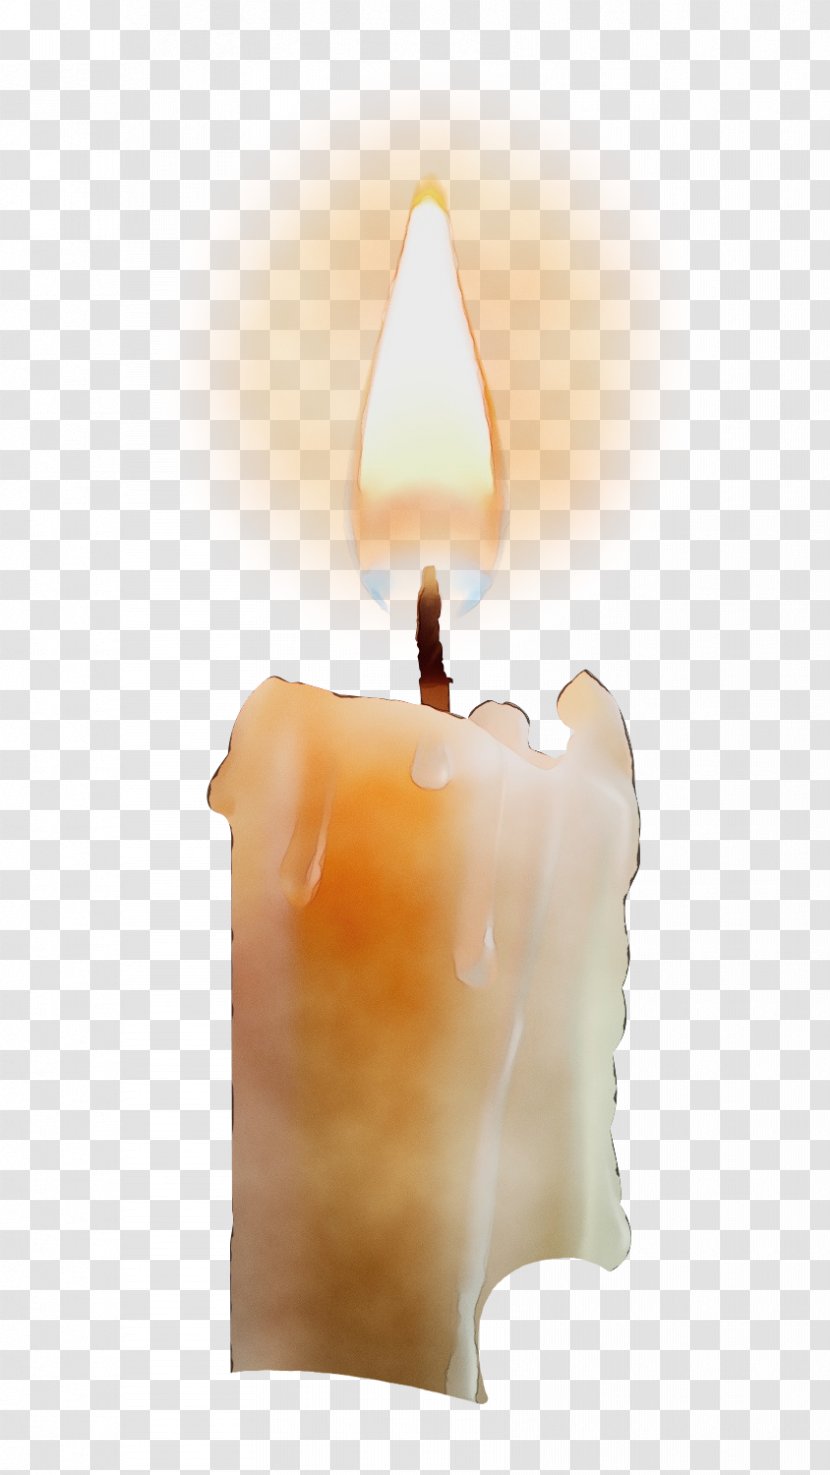 Candle Lighting Wax Flameless Flame - Paint - Holder Interior Design Transparent PNG